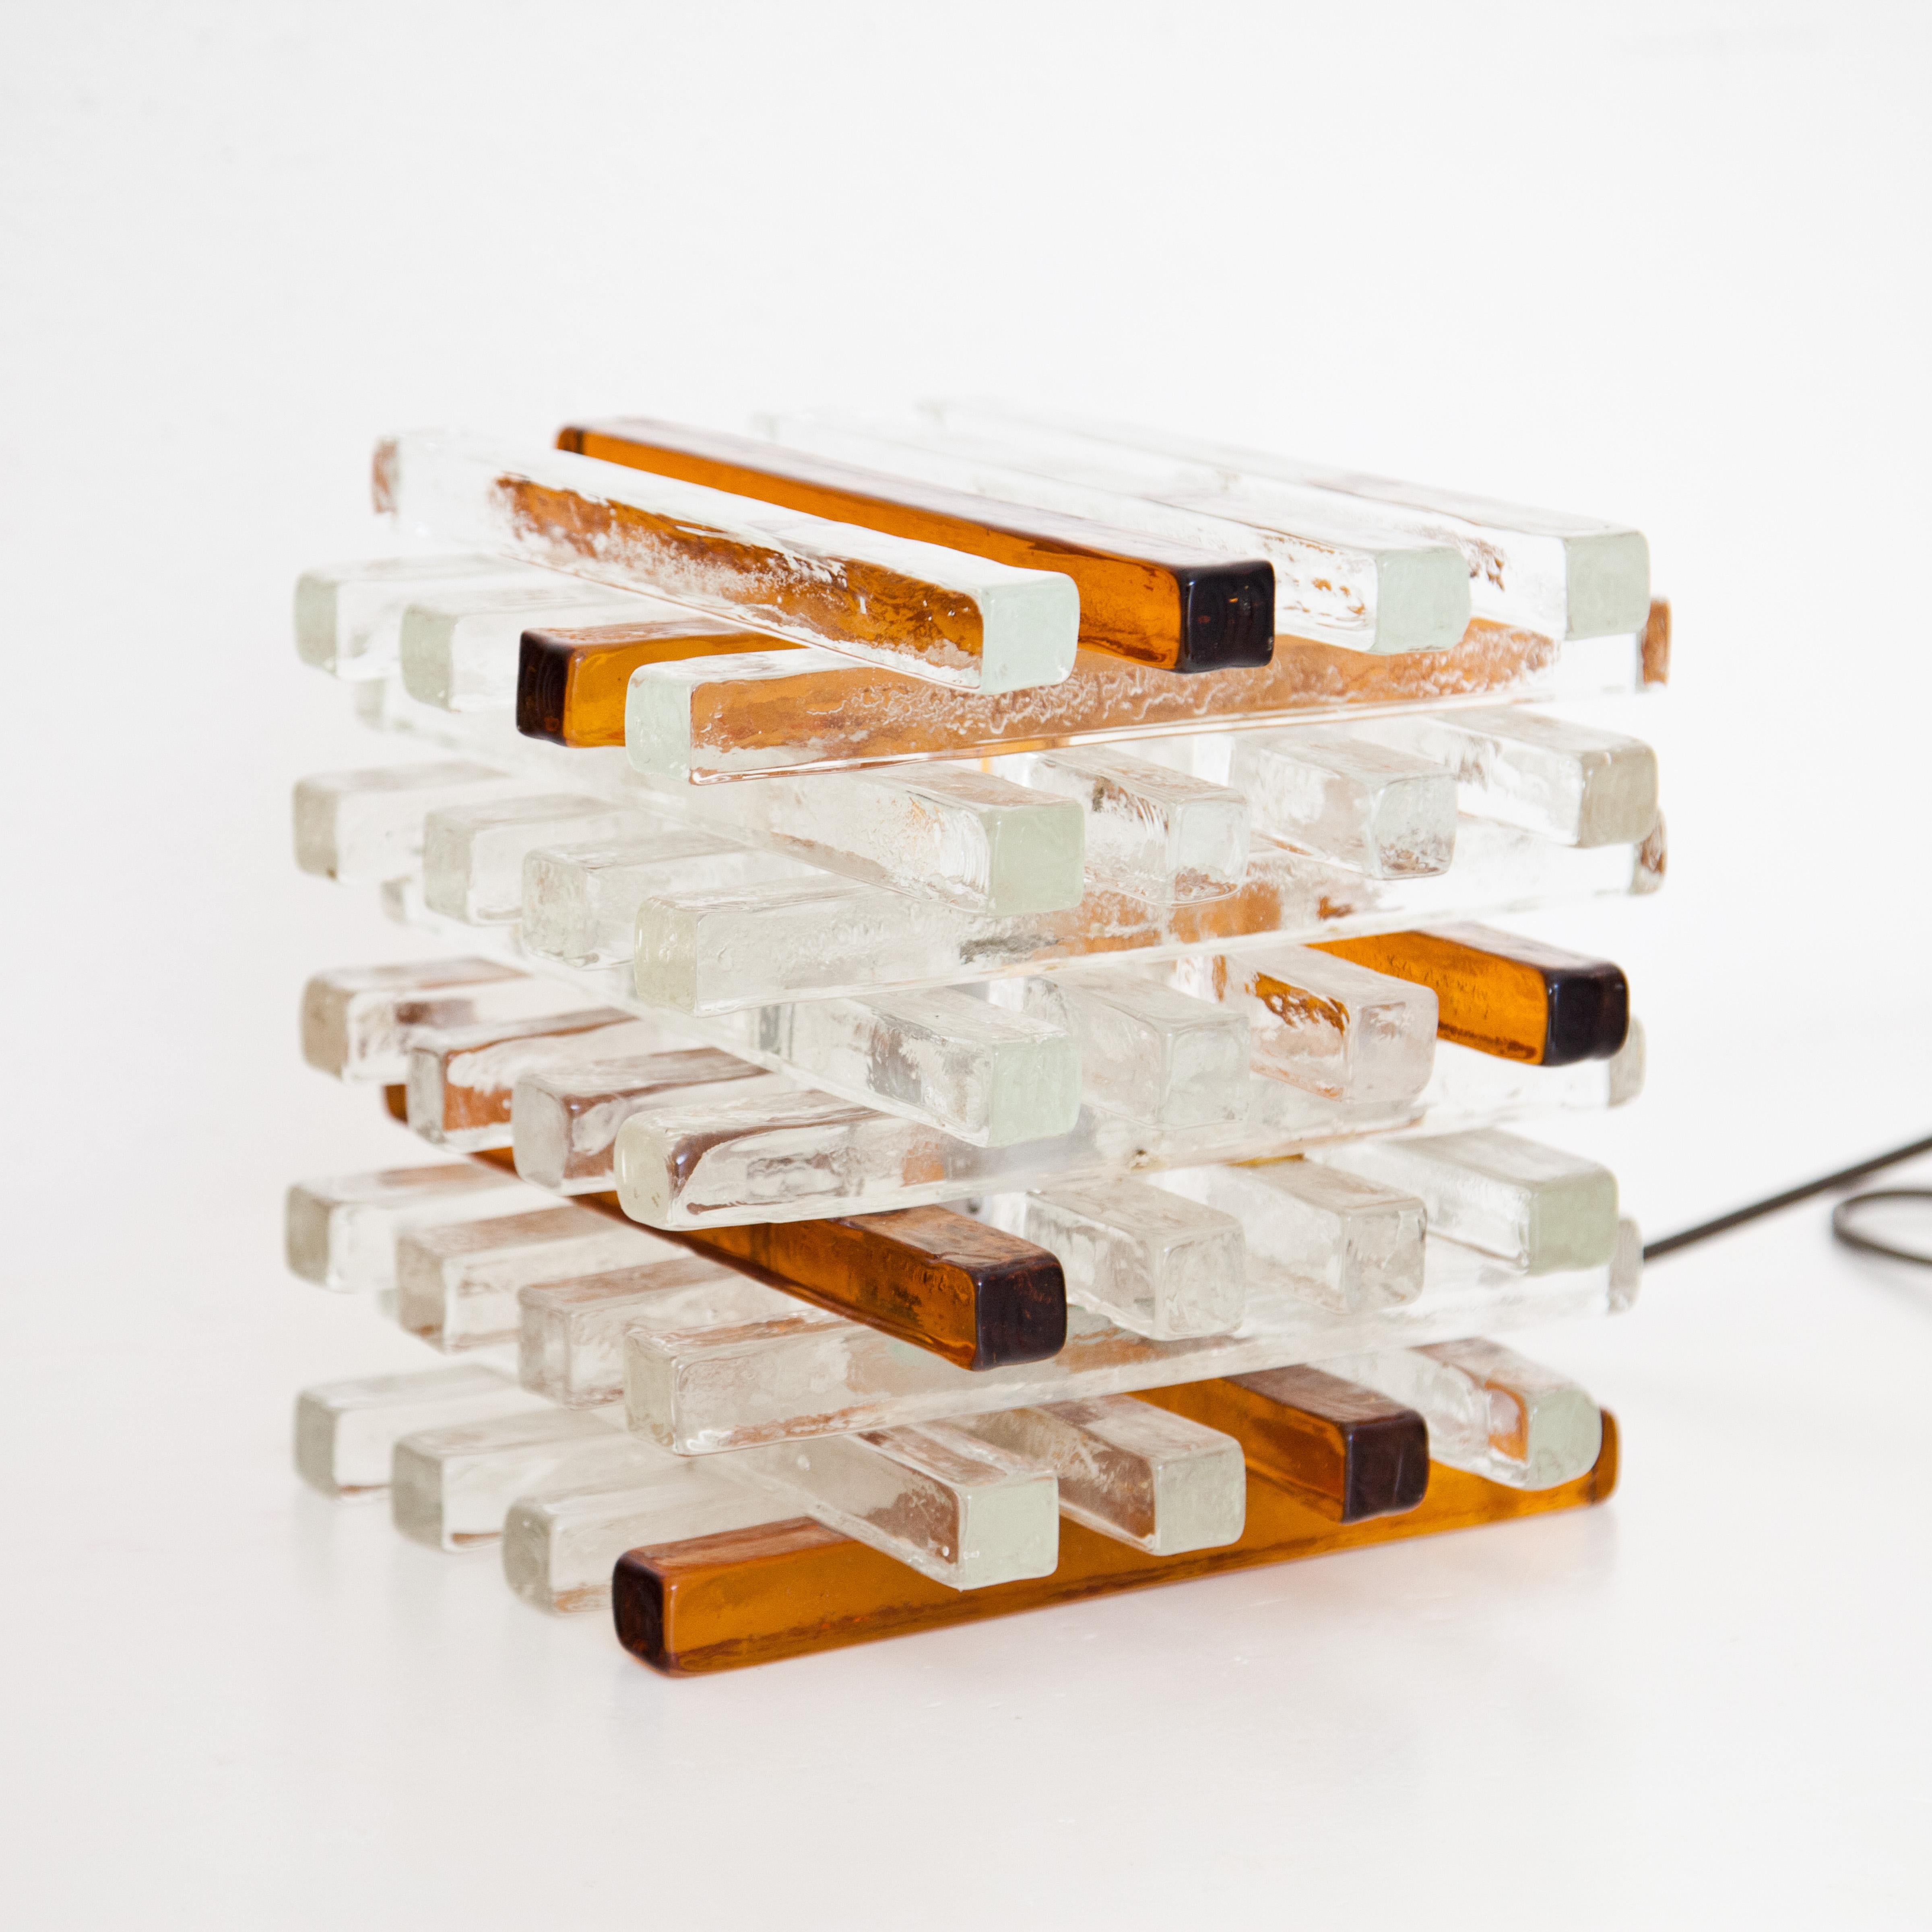 Table lamp consisting of rough glass rods stacked crosswise in alternating transparent and amber colours. Designed by Albano Poli for Poliarte. For the electrification we assume no liability and no warranty.